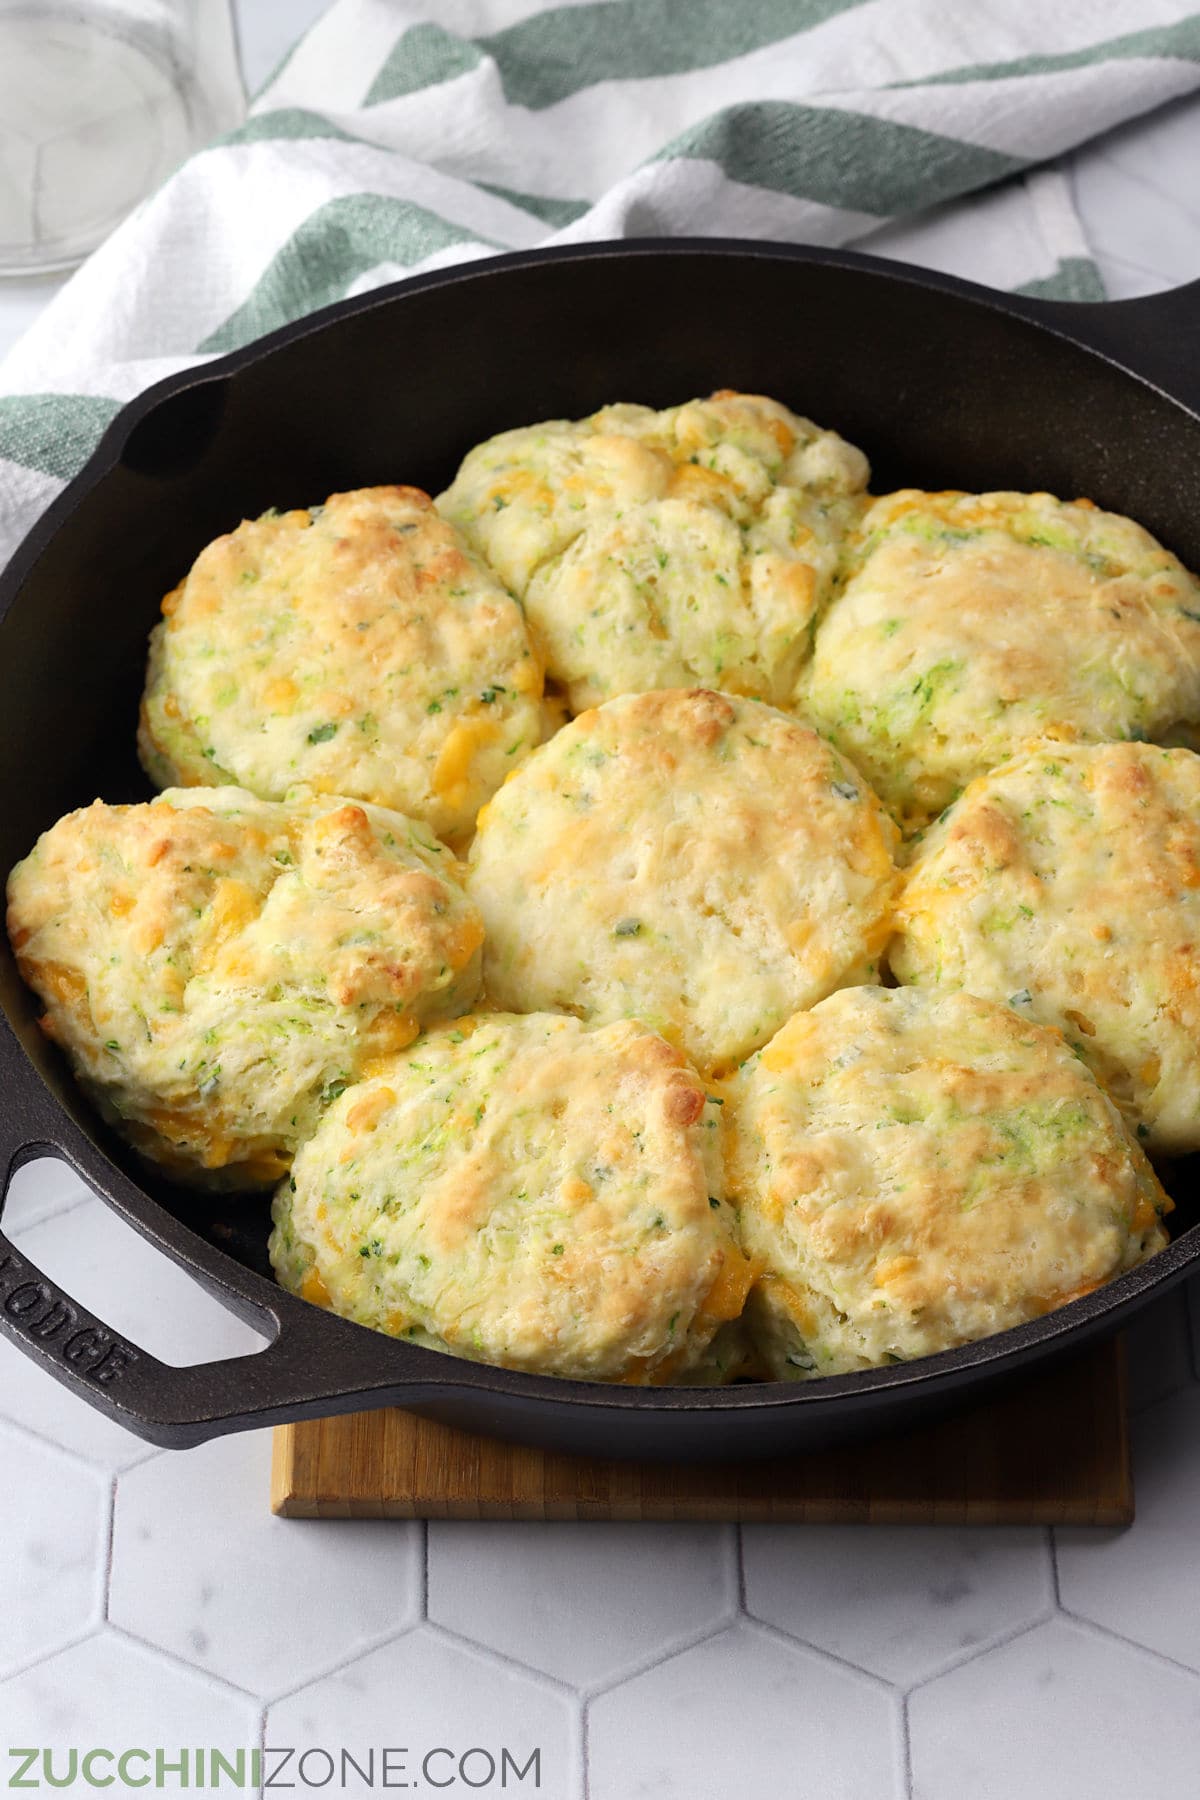 Cast iron skillet filled with baked zucchini cheddar biscuits.